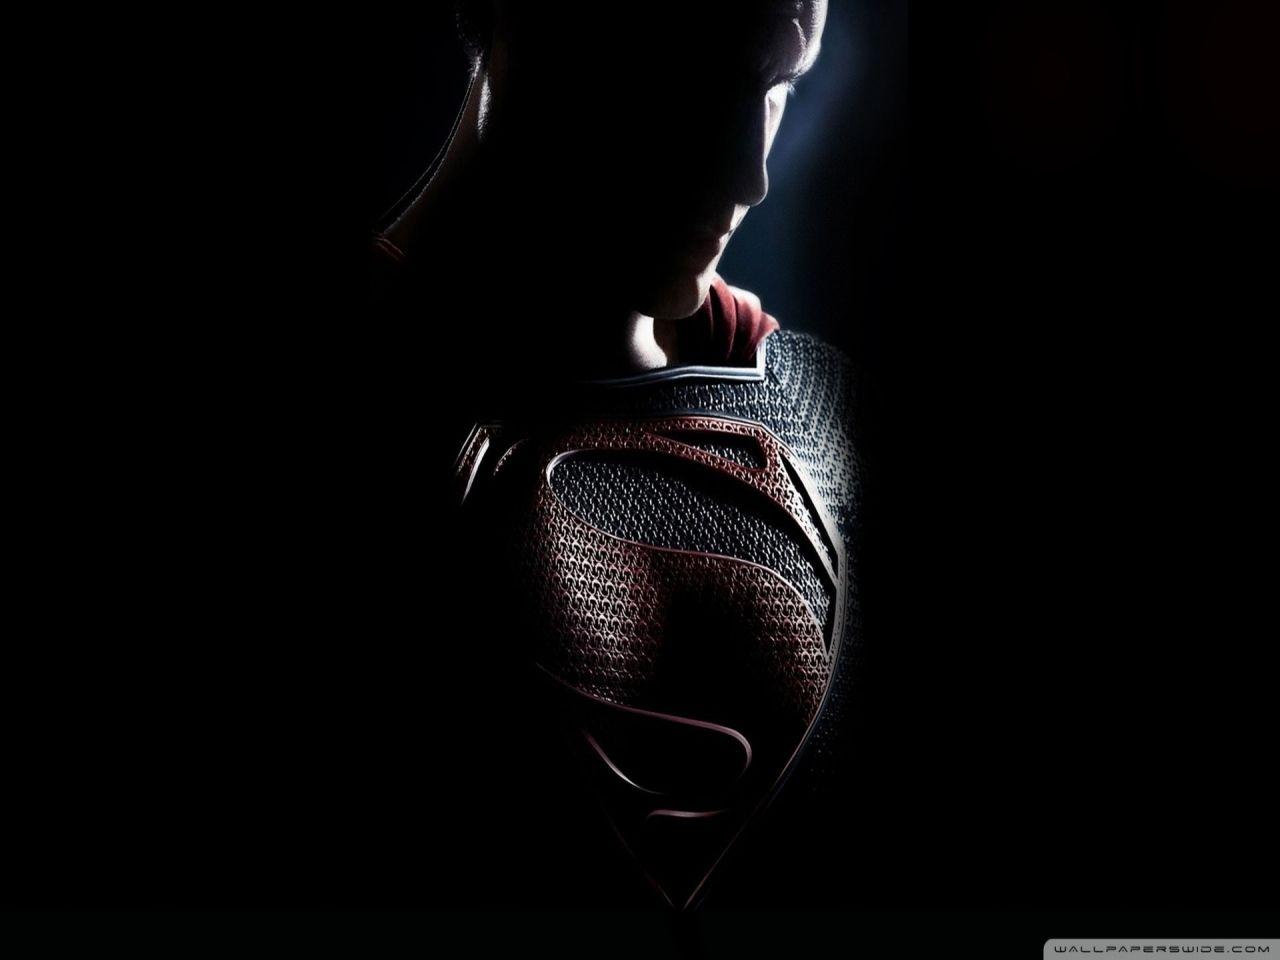 Superheroes Wallpaper, 40 Superheroes Background Collection